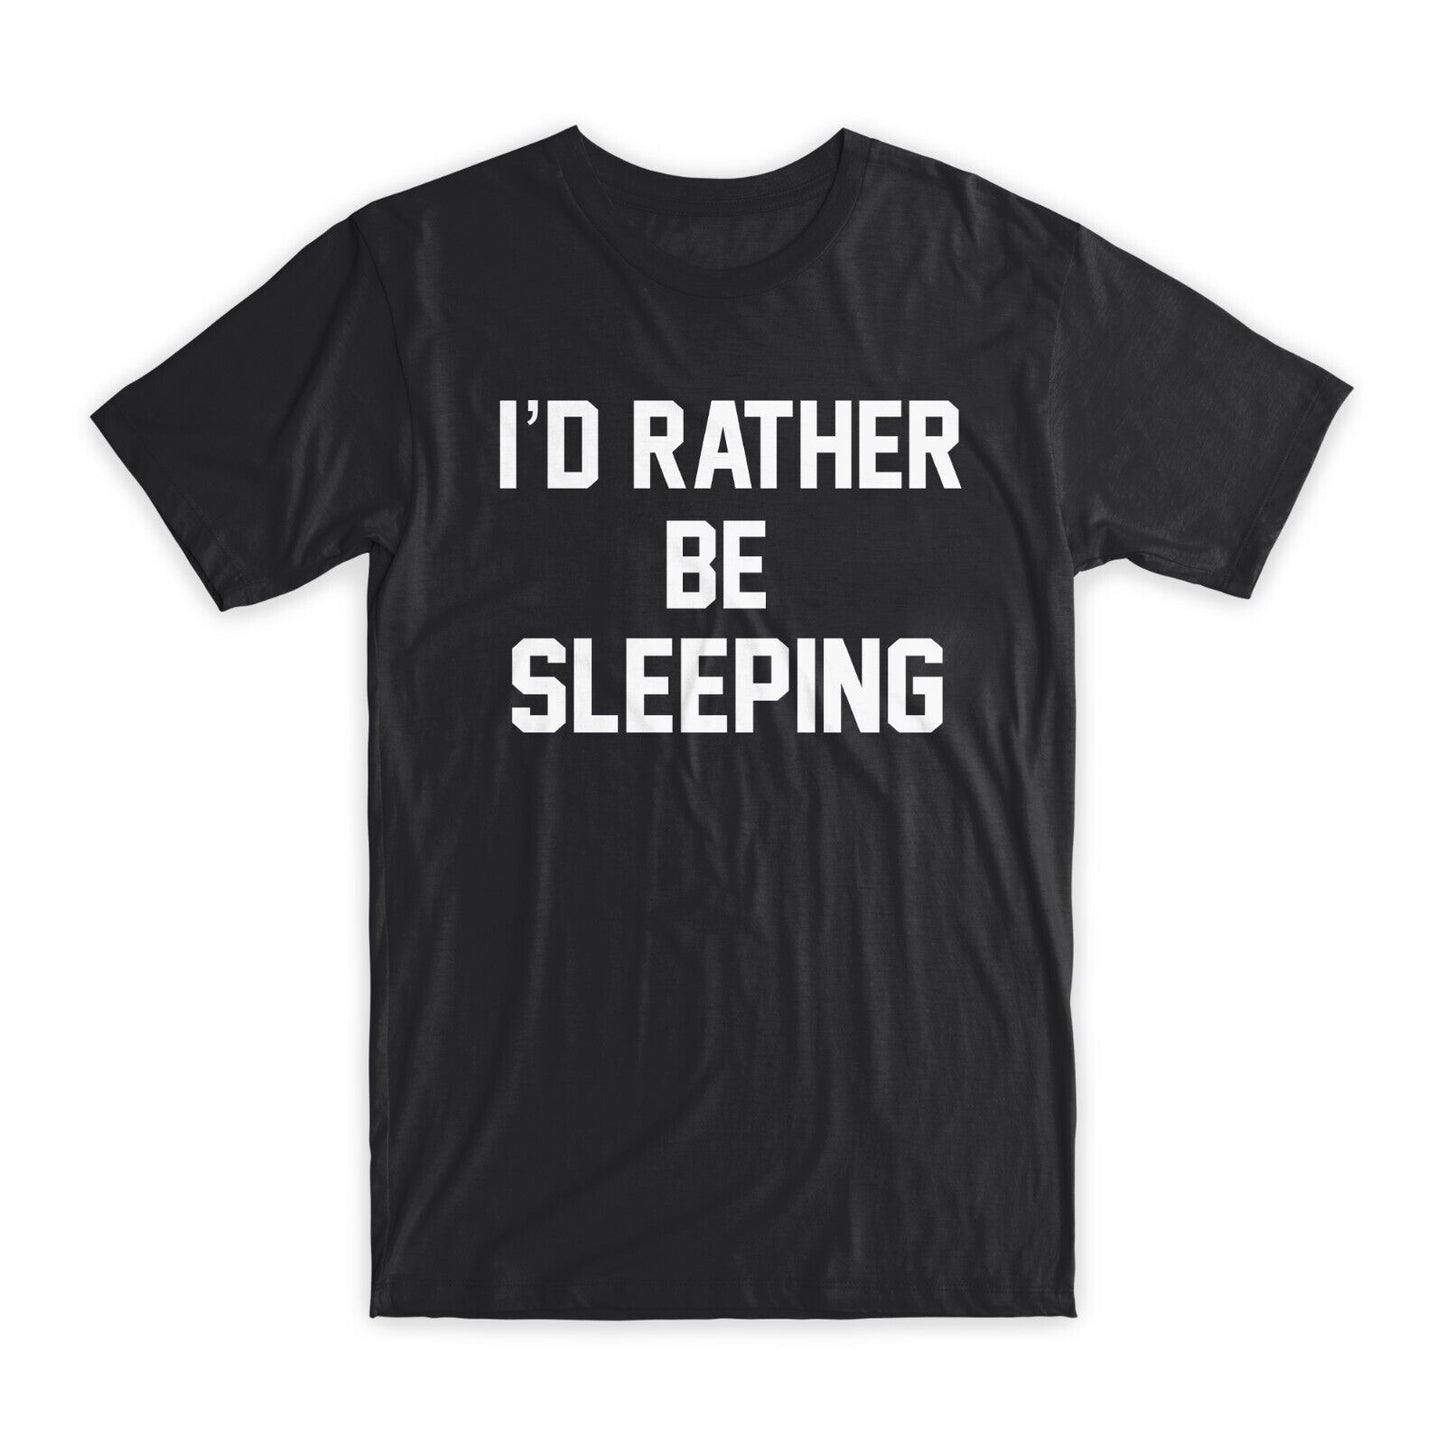 I'd Rather Be Sleeping T-Shirt Premium Soft Cotton Crew Neck Funny Tee Gifts NEW